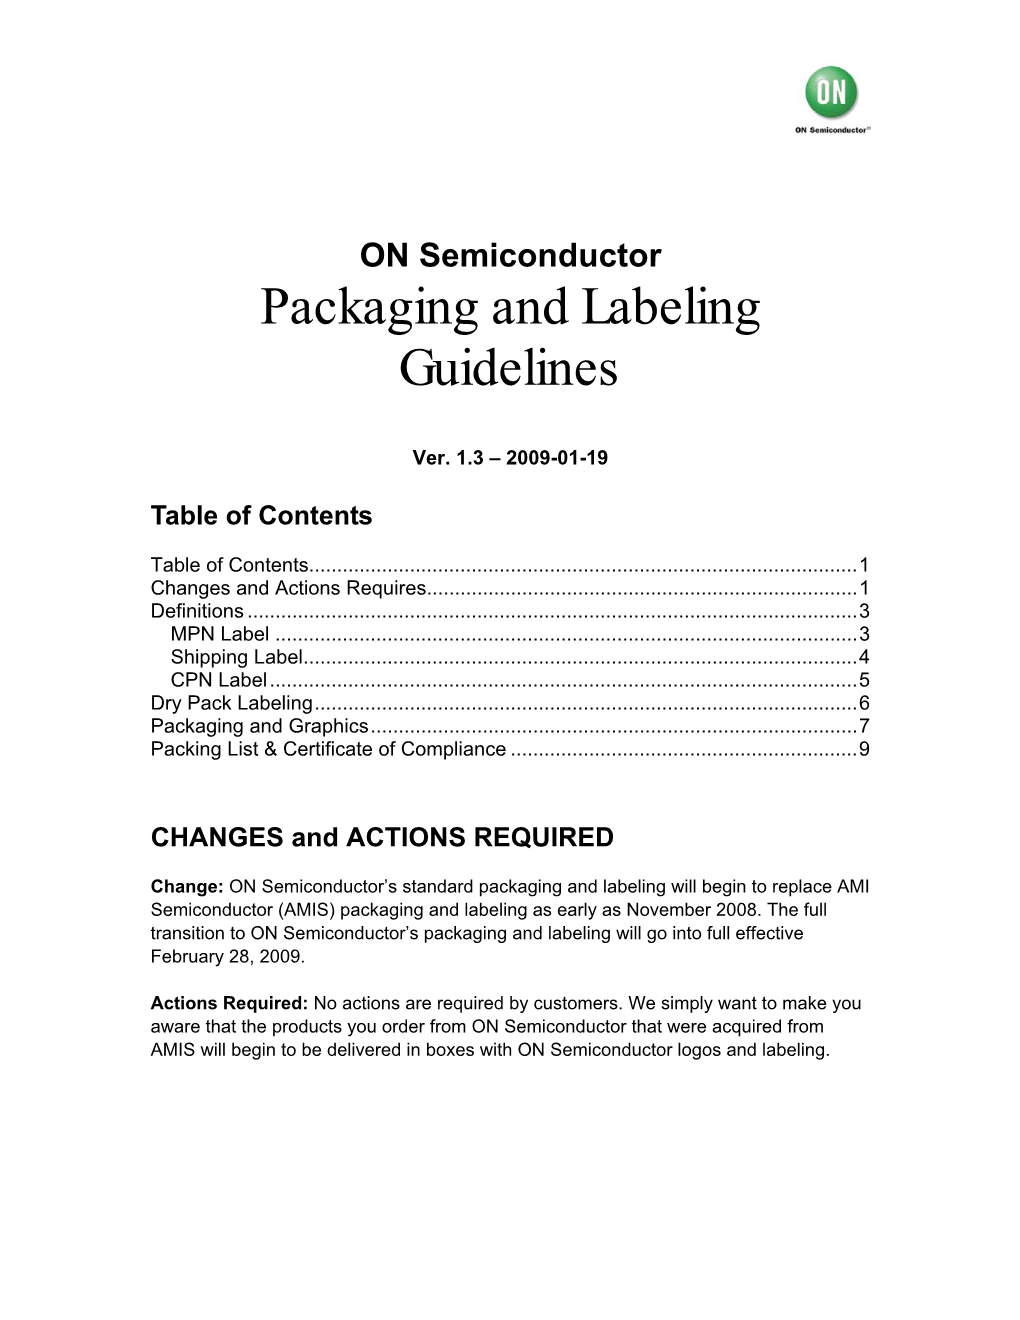 ON Semiconductor Packaging and Labeling Guidelines